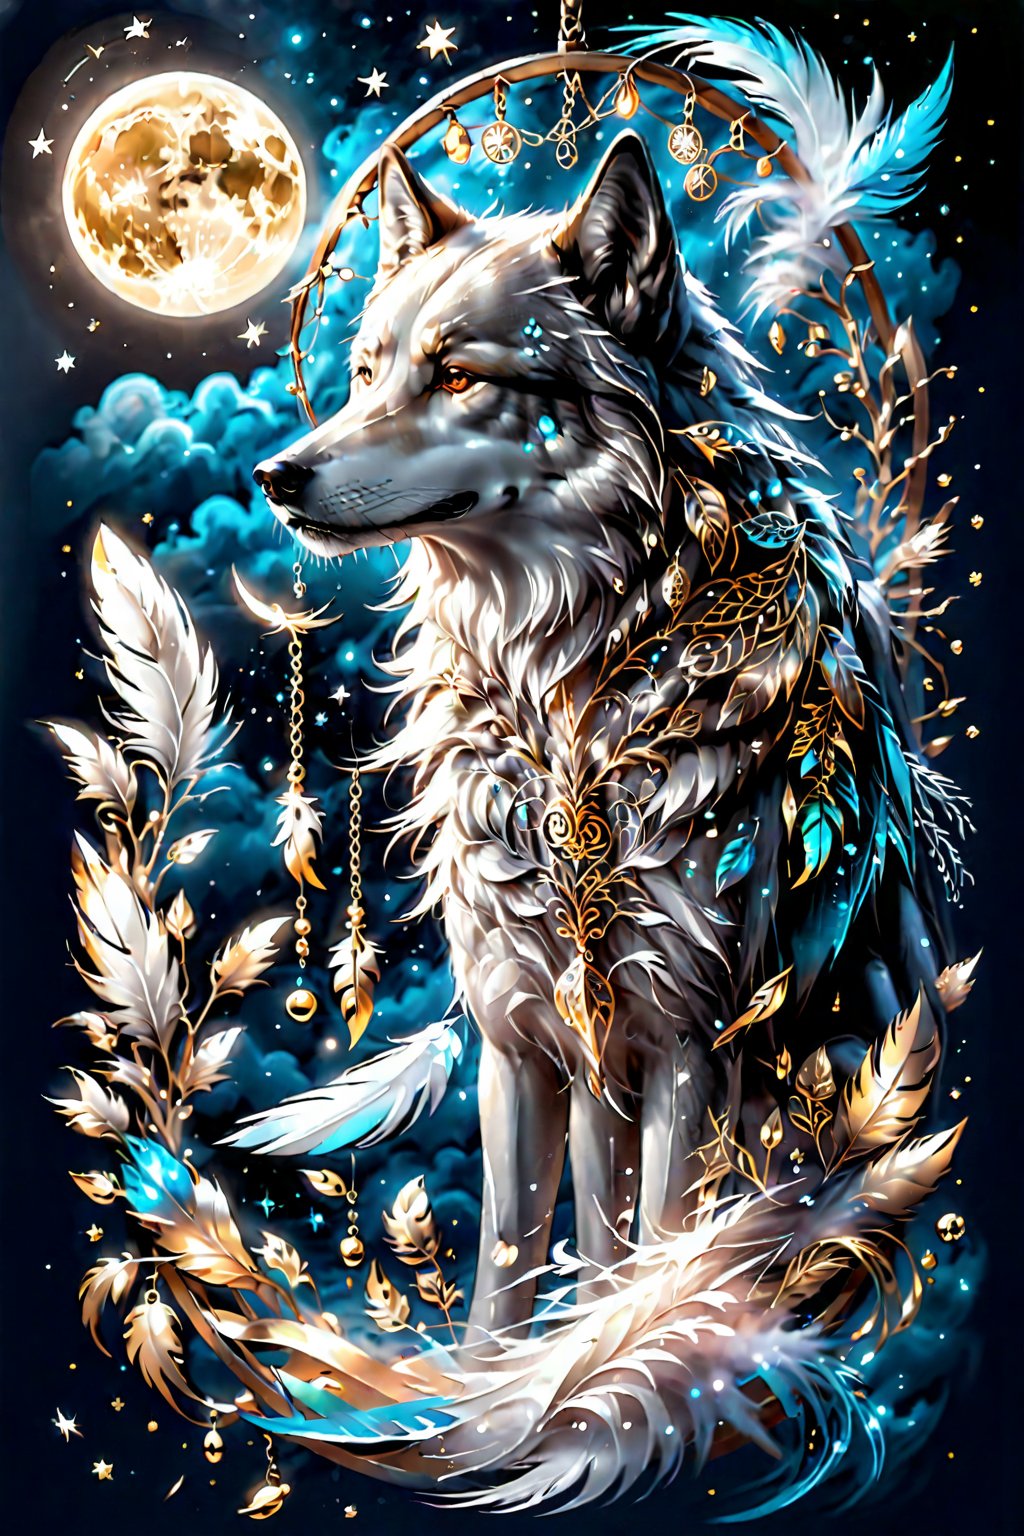 A tattoo design where the dreamcatcher forms the body of a wolf, howling at the moon, with detailed feathers hanging from the dreamcatcher's web, set against a dark night sky speckled with stars.